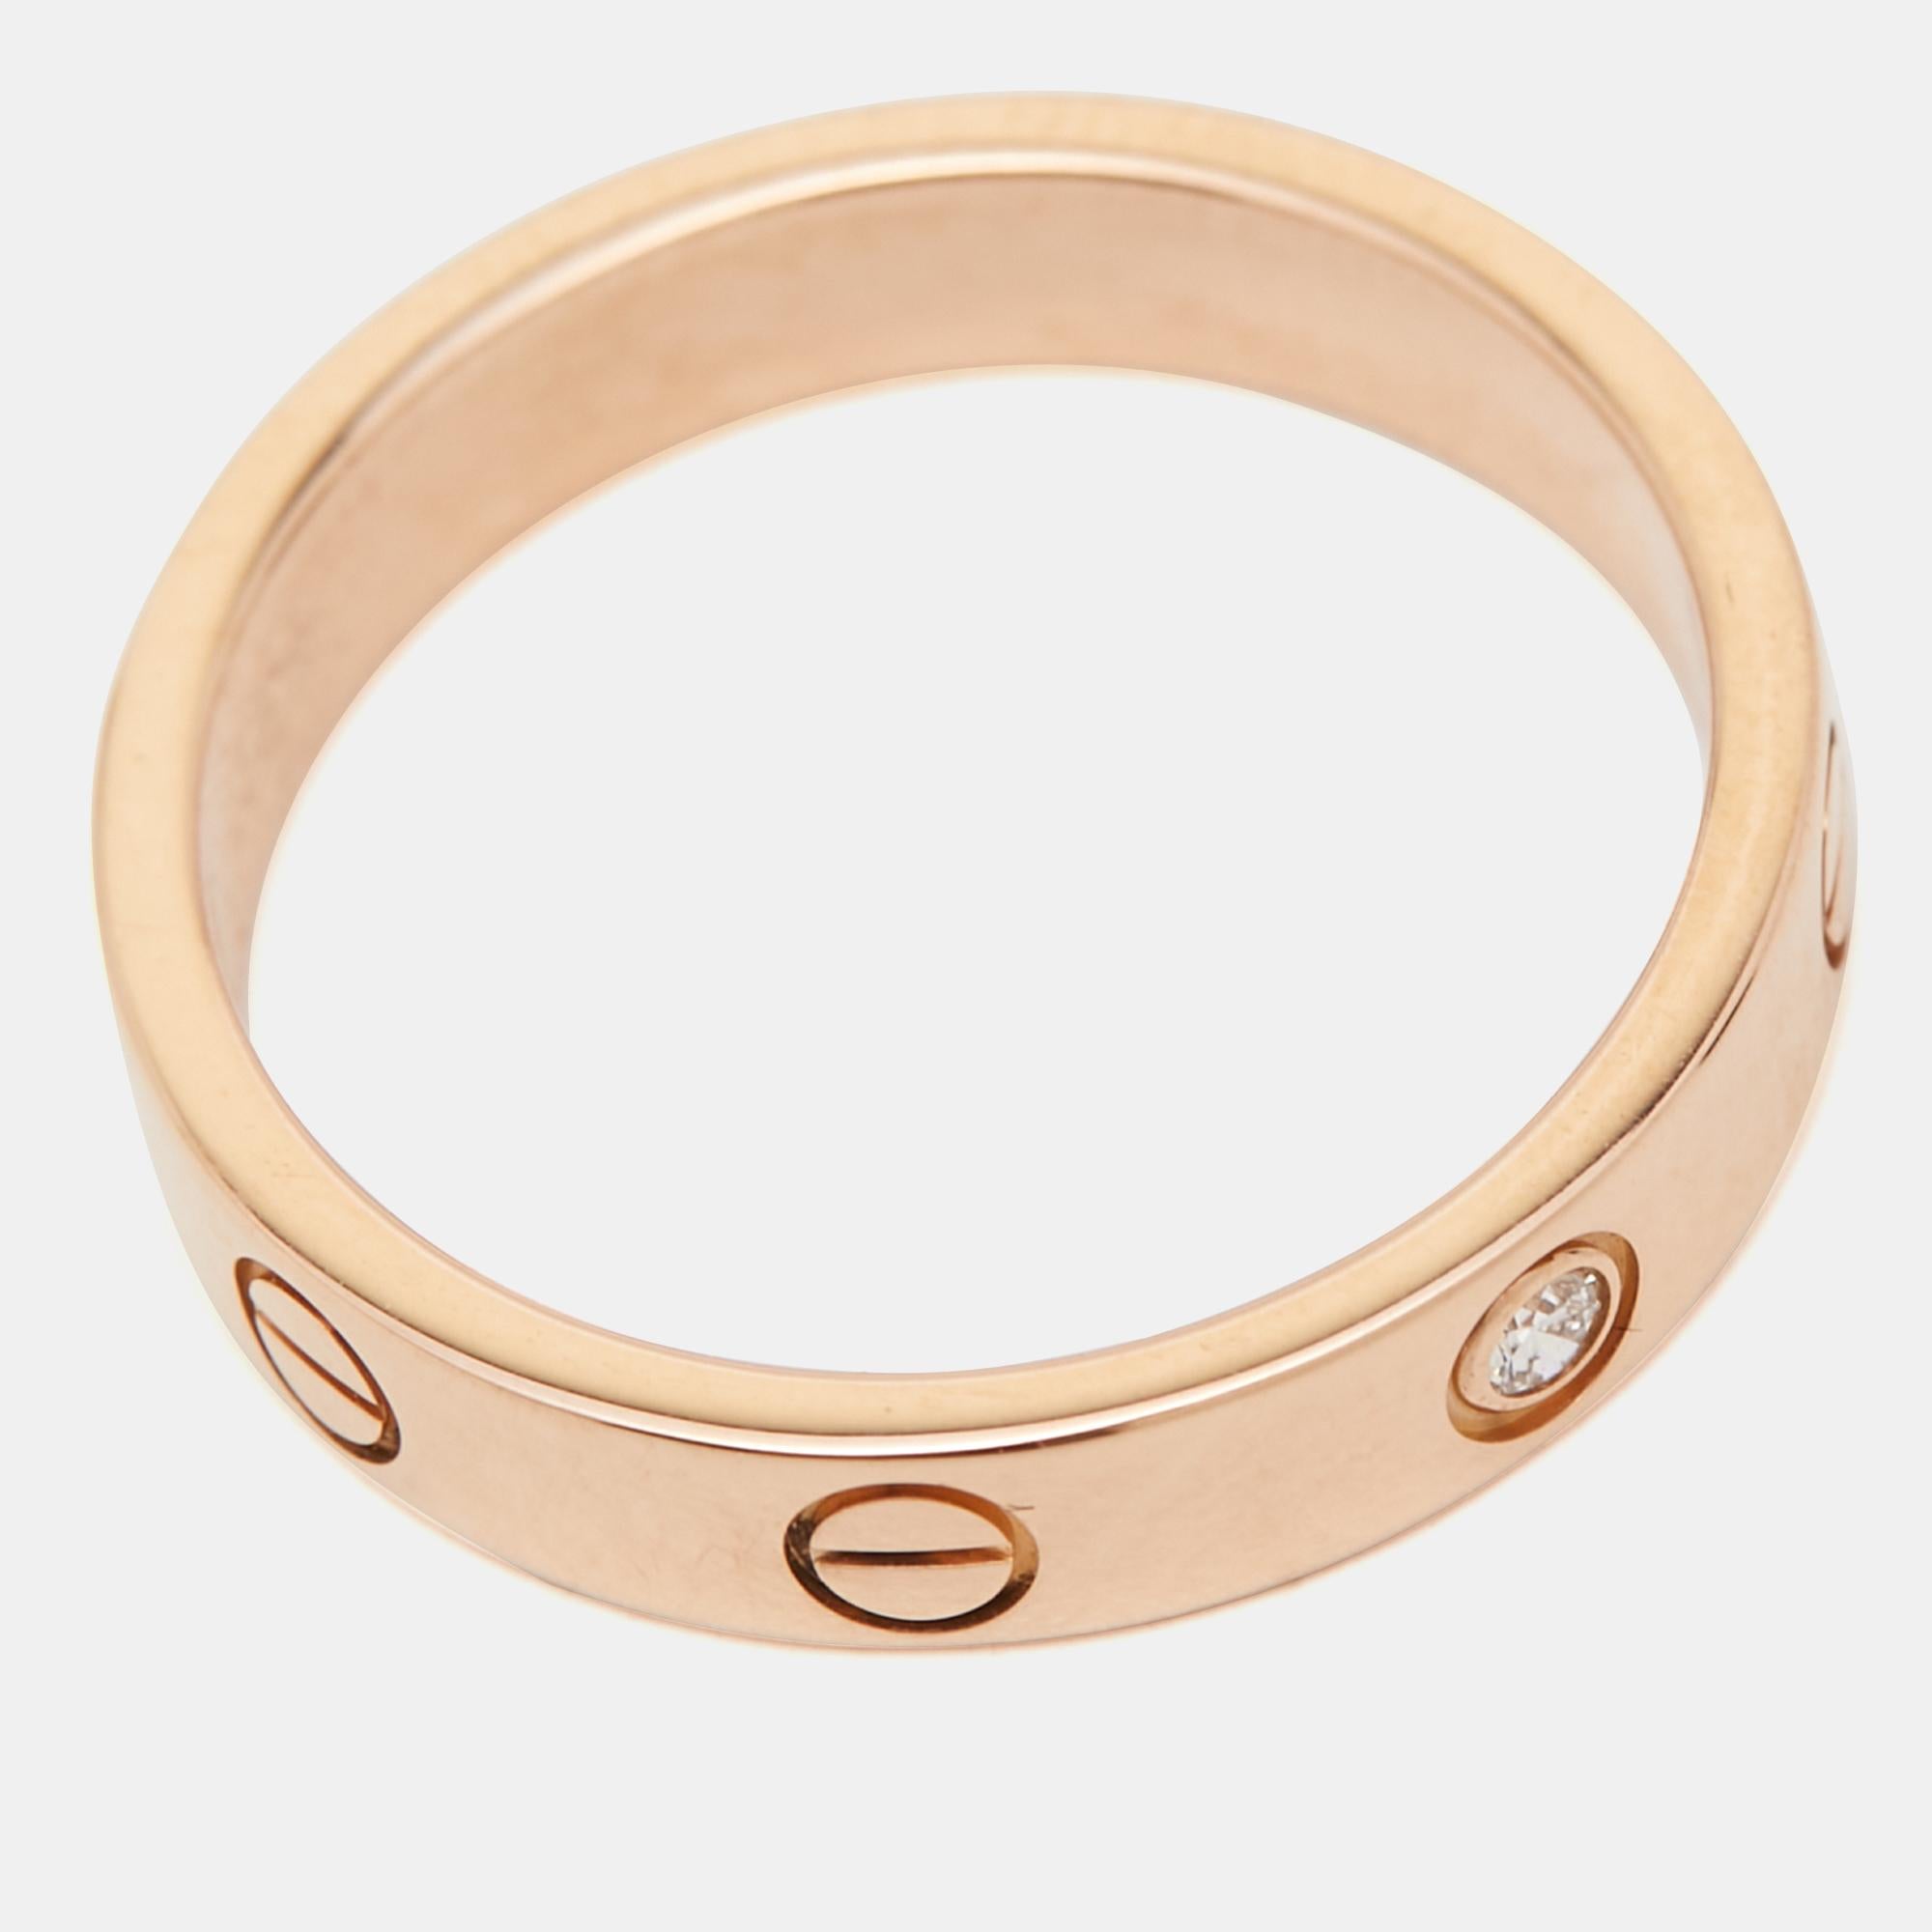 One of the most iconic and loved designs from the house of Cartier, this stunning Love ring is an icon of style and luxury. Constructed in 18k rose gold, this ring features screw details all around the surface as symbols of a sealed and secured